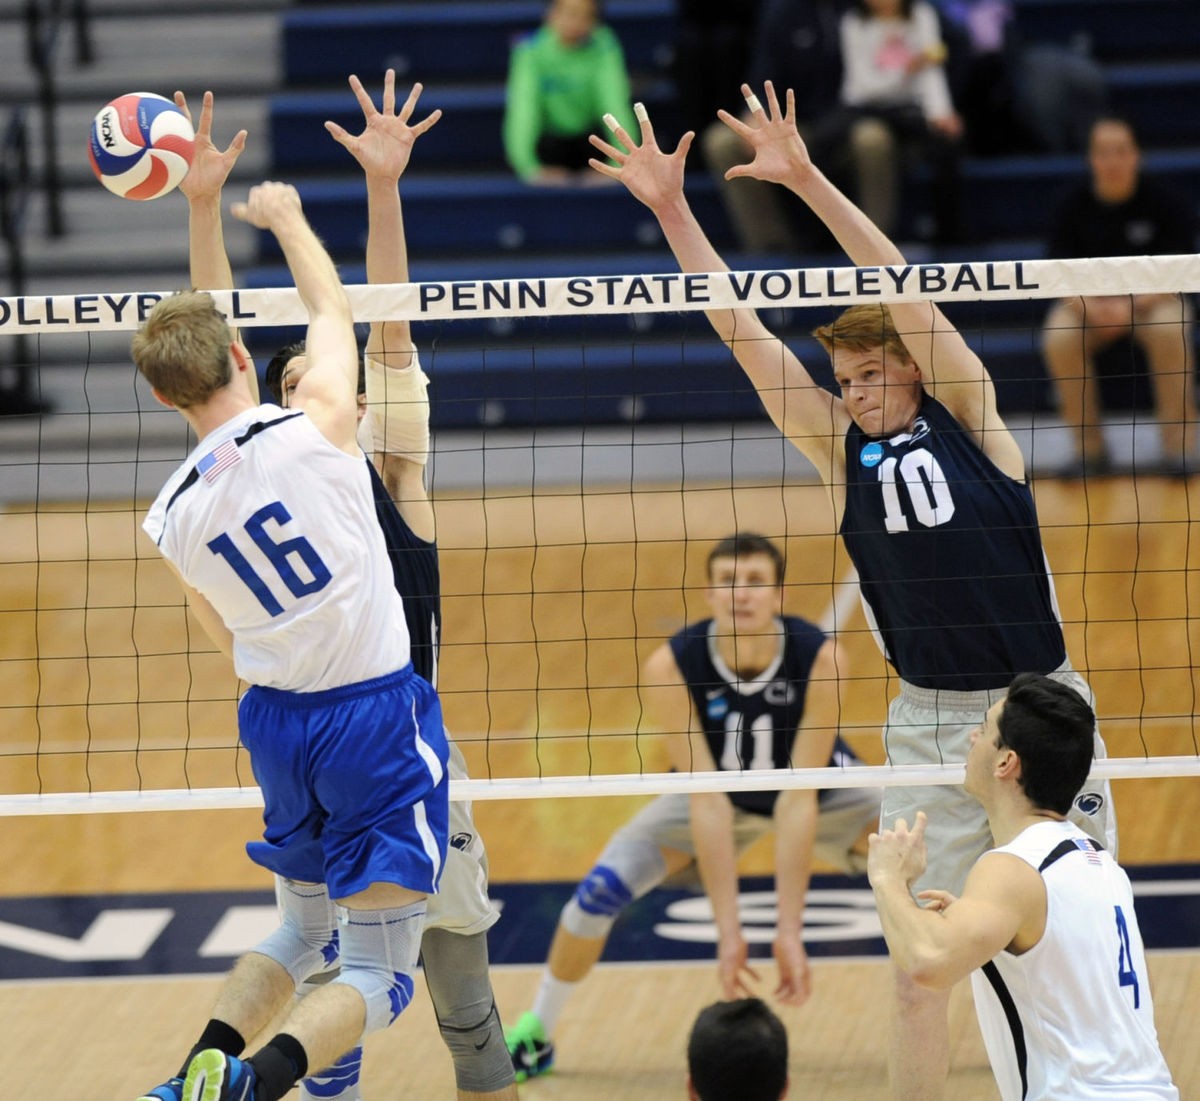 Penn State men's volleyball stays hot with win against ranked Saint Francis